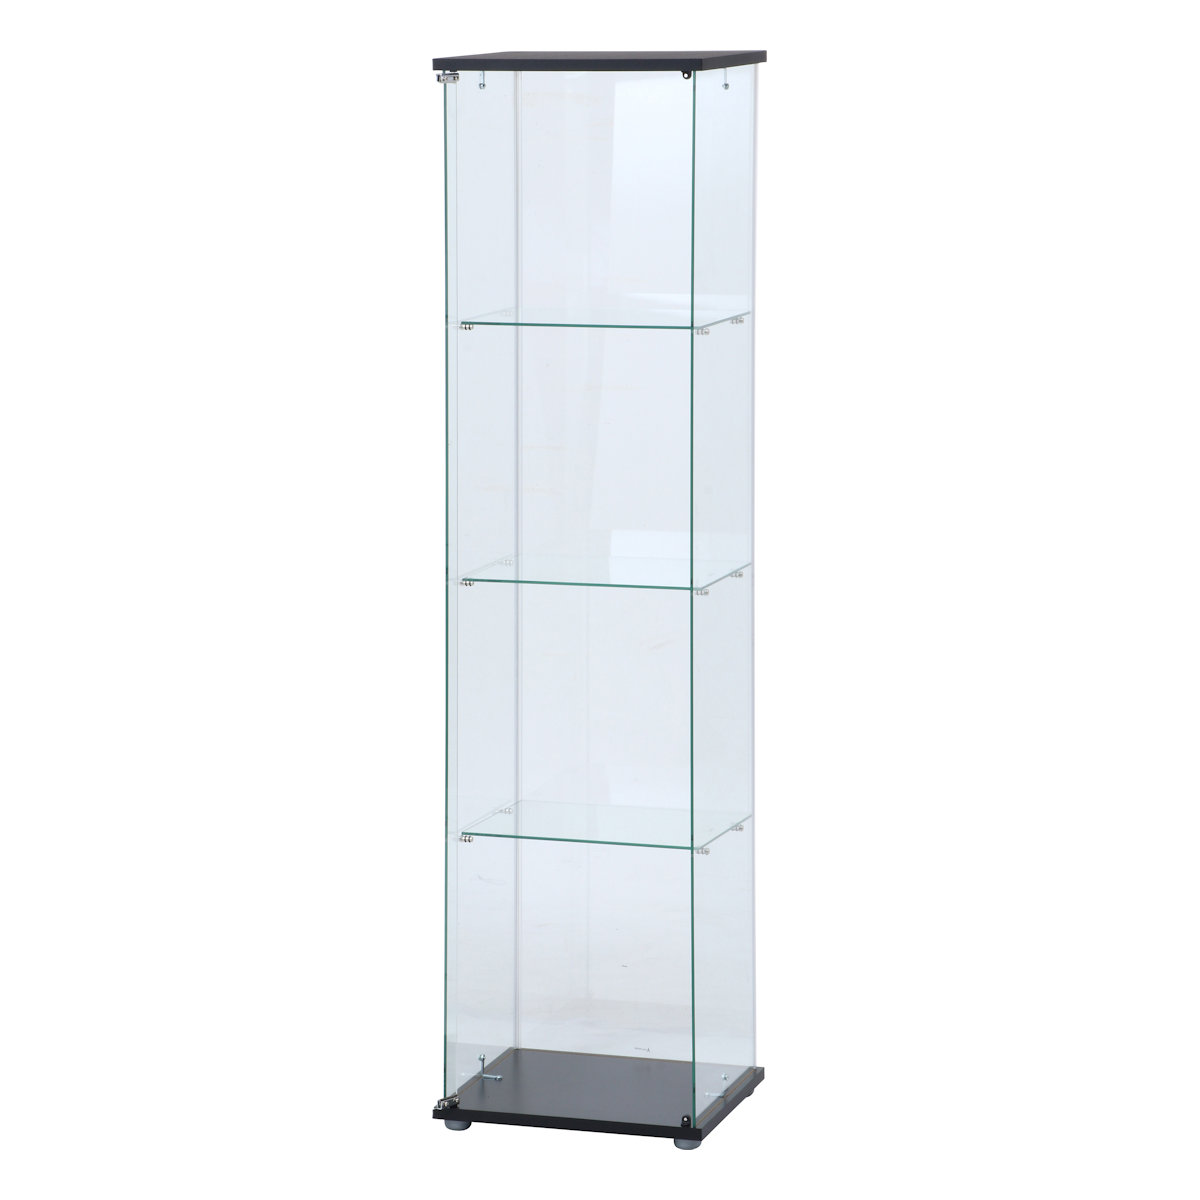  un- two trade glass collection case 4 step black whole surface glass mine timbering none width 43× height 162× depth 37cm TMG-G